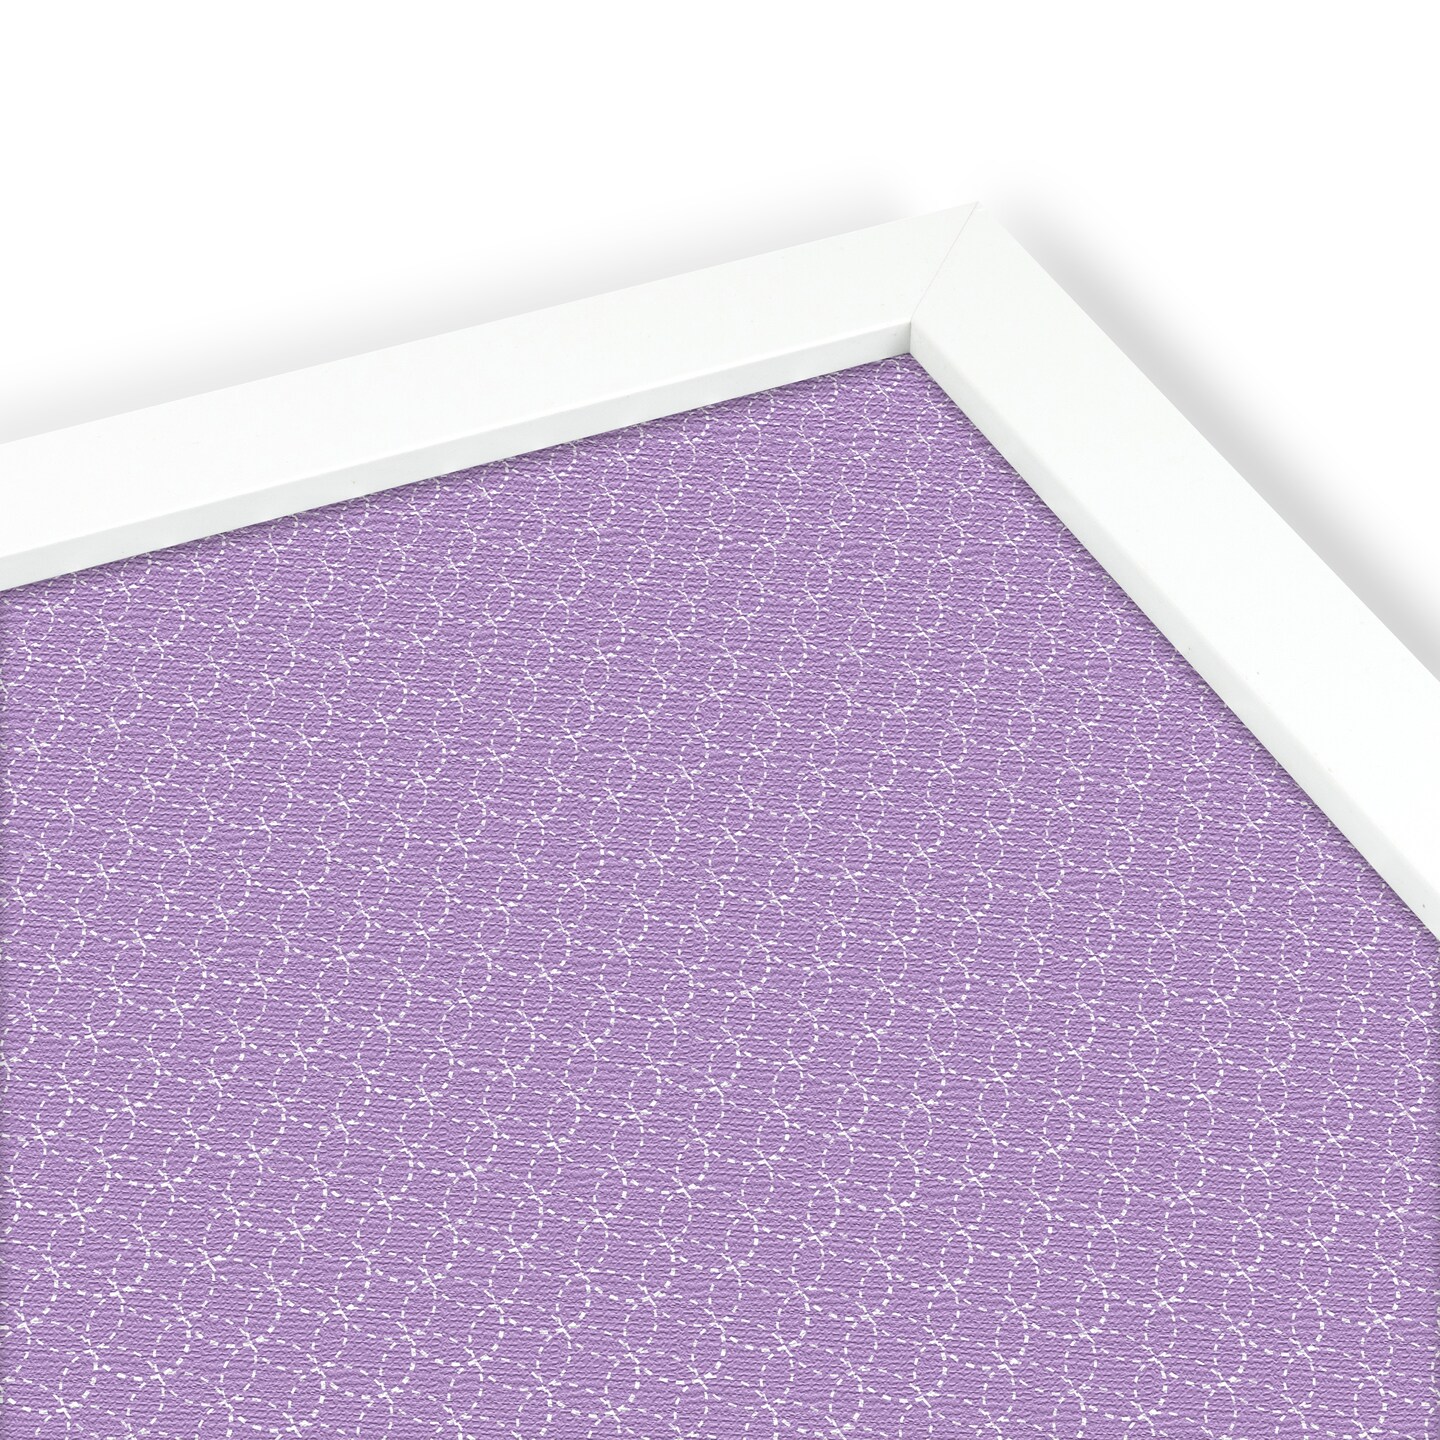 PinPix Custom Bulletin Board Purple Circles Poster Board Has a Fabric Style Canvas Finish, Framed in Satin White Frame, by ArtToFrames (PinPix-493)